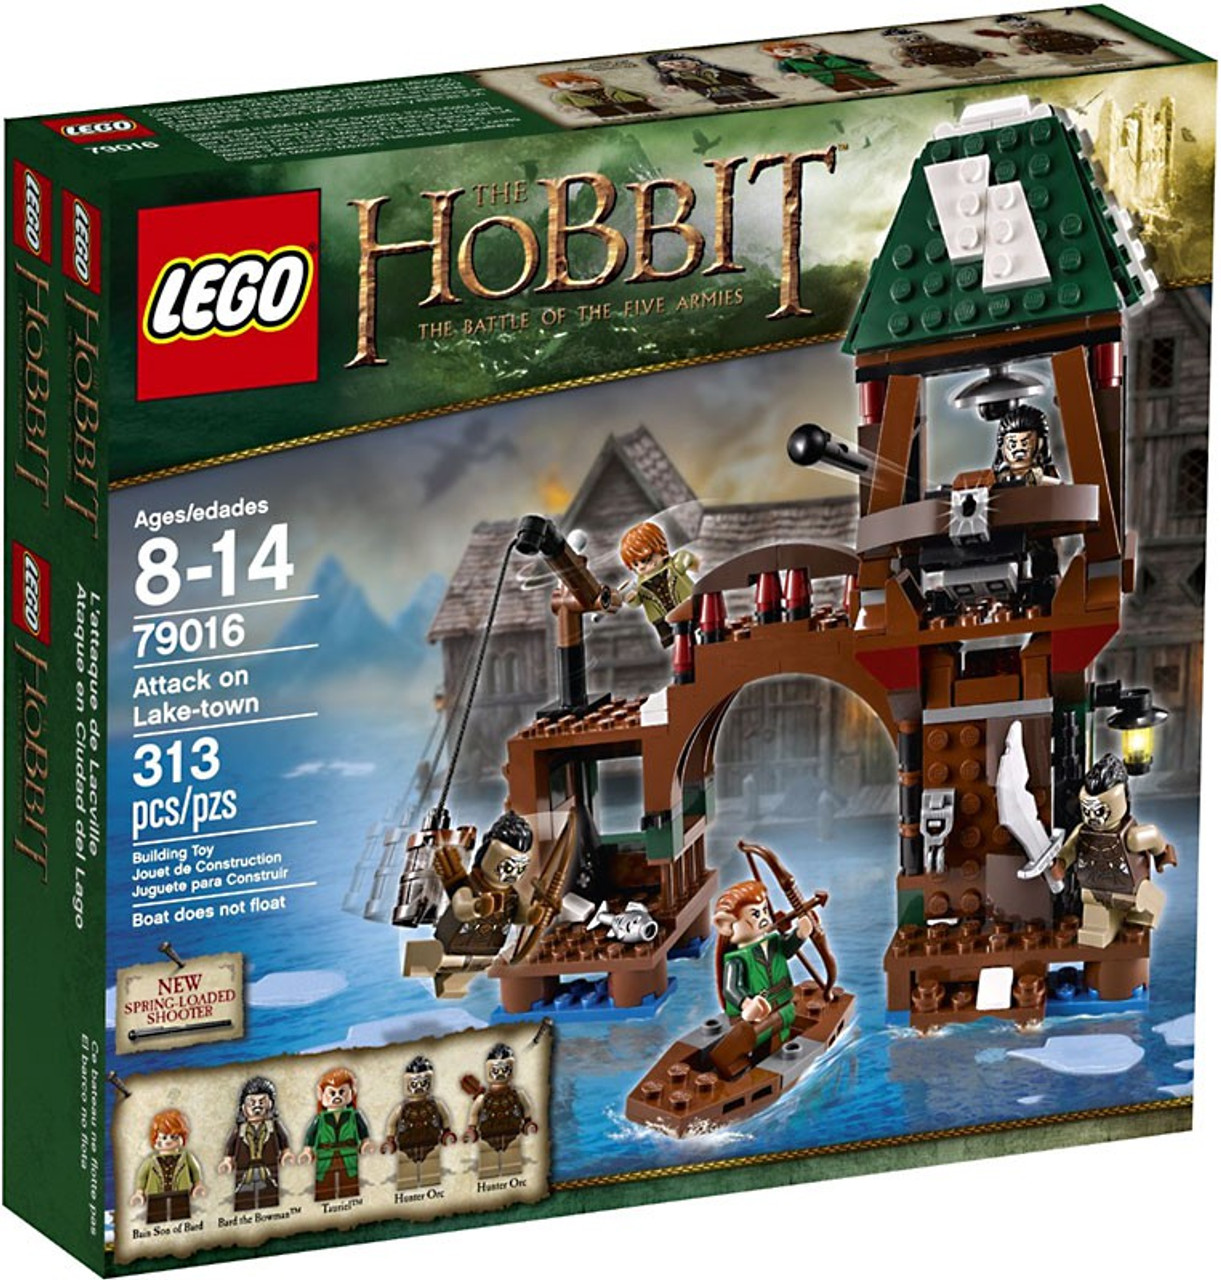 lego-the-hobbit-the-battle-of-the-five-armies-attack-on-lake-town-set-79016-toywiz